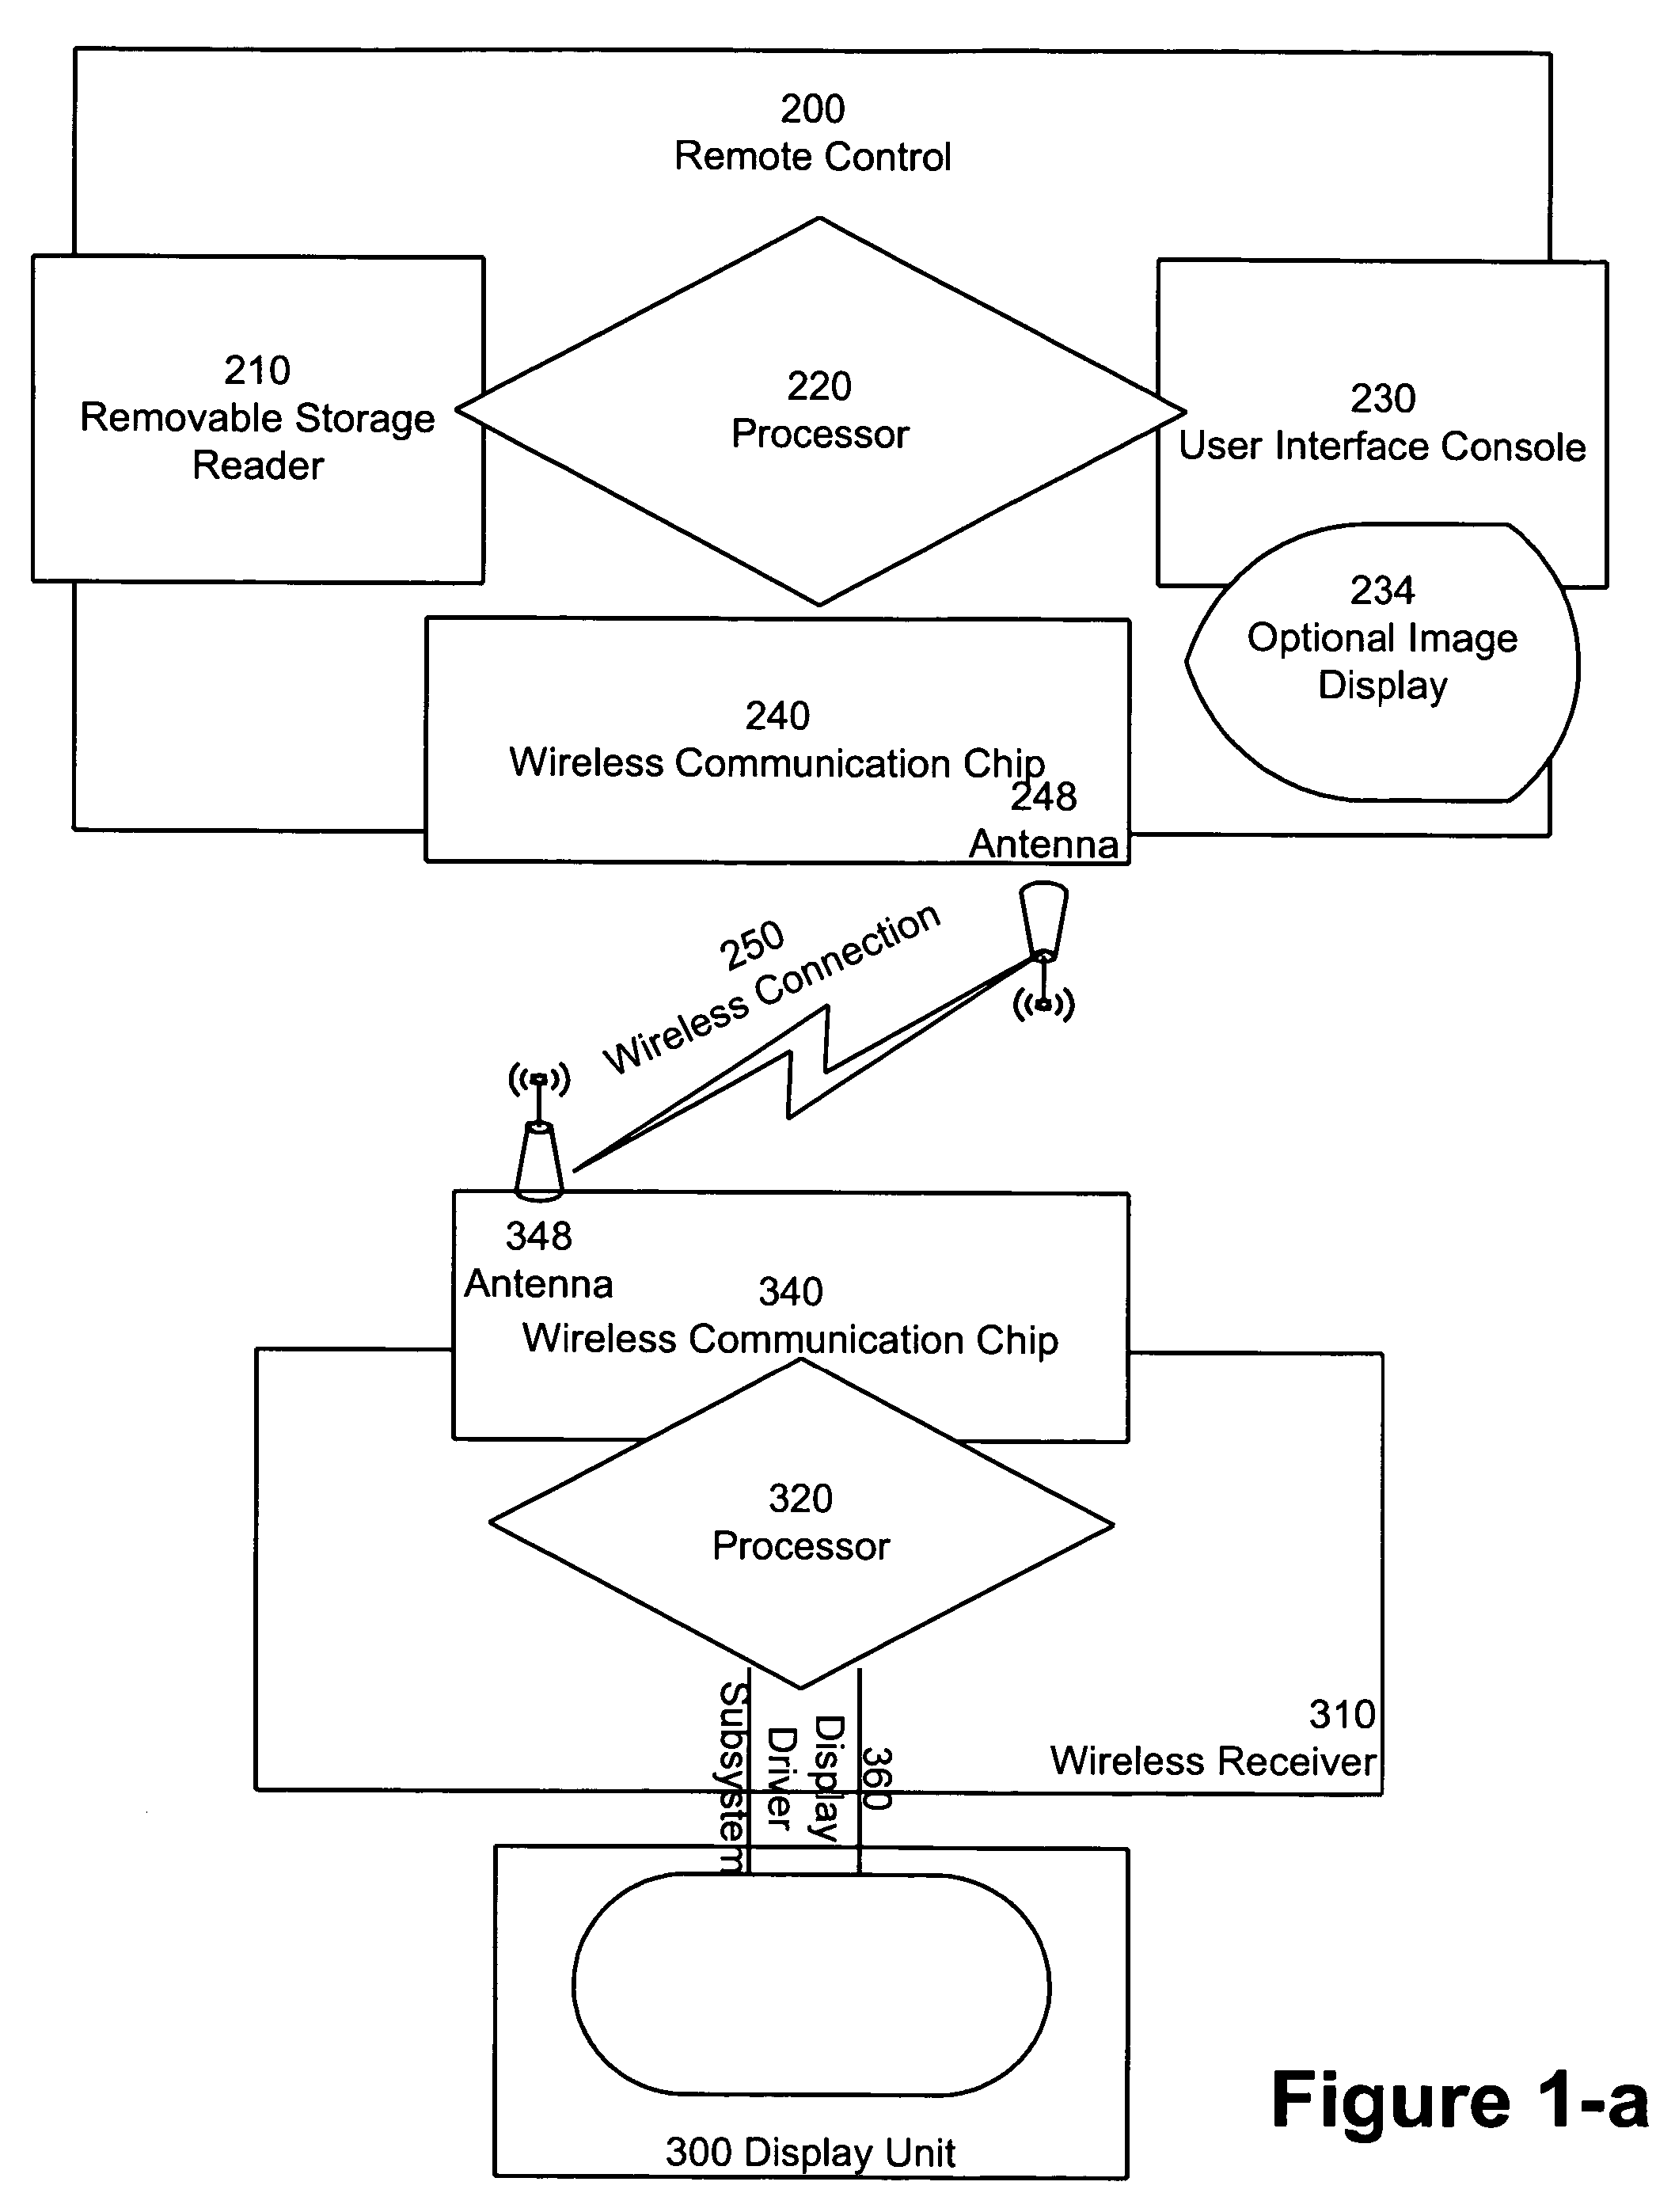 Remote control apparatus for consumer electronic appliances